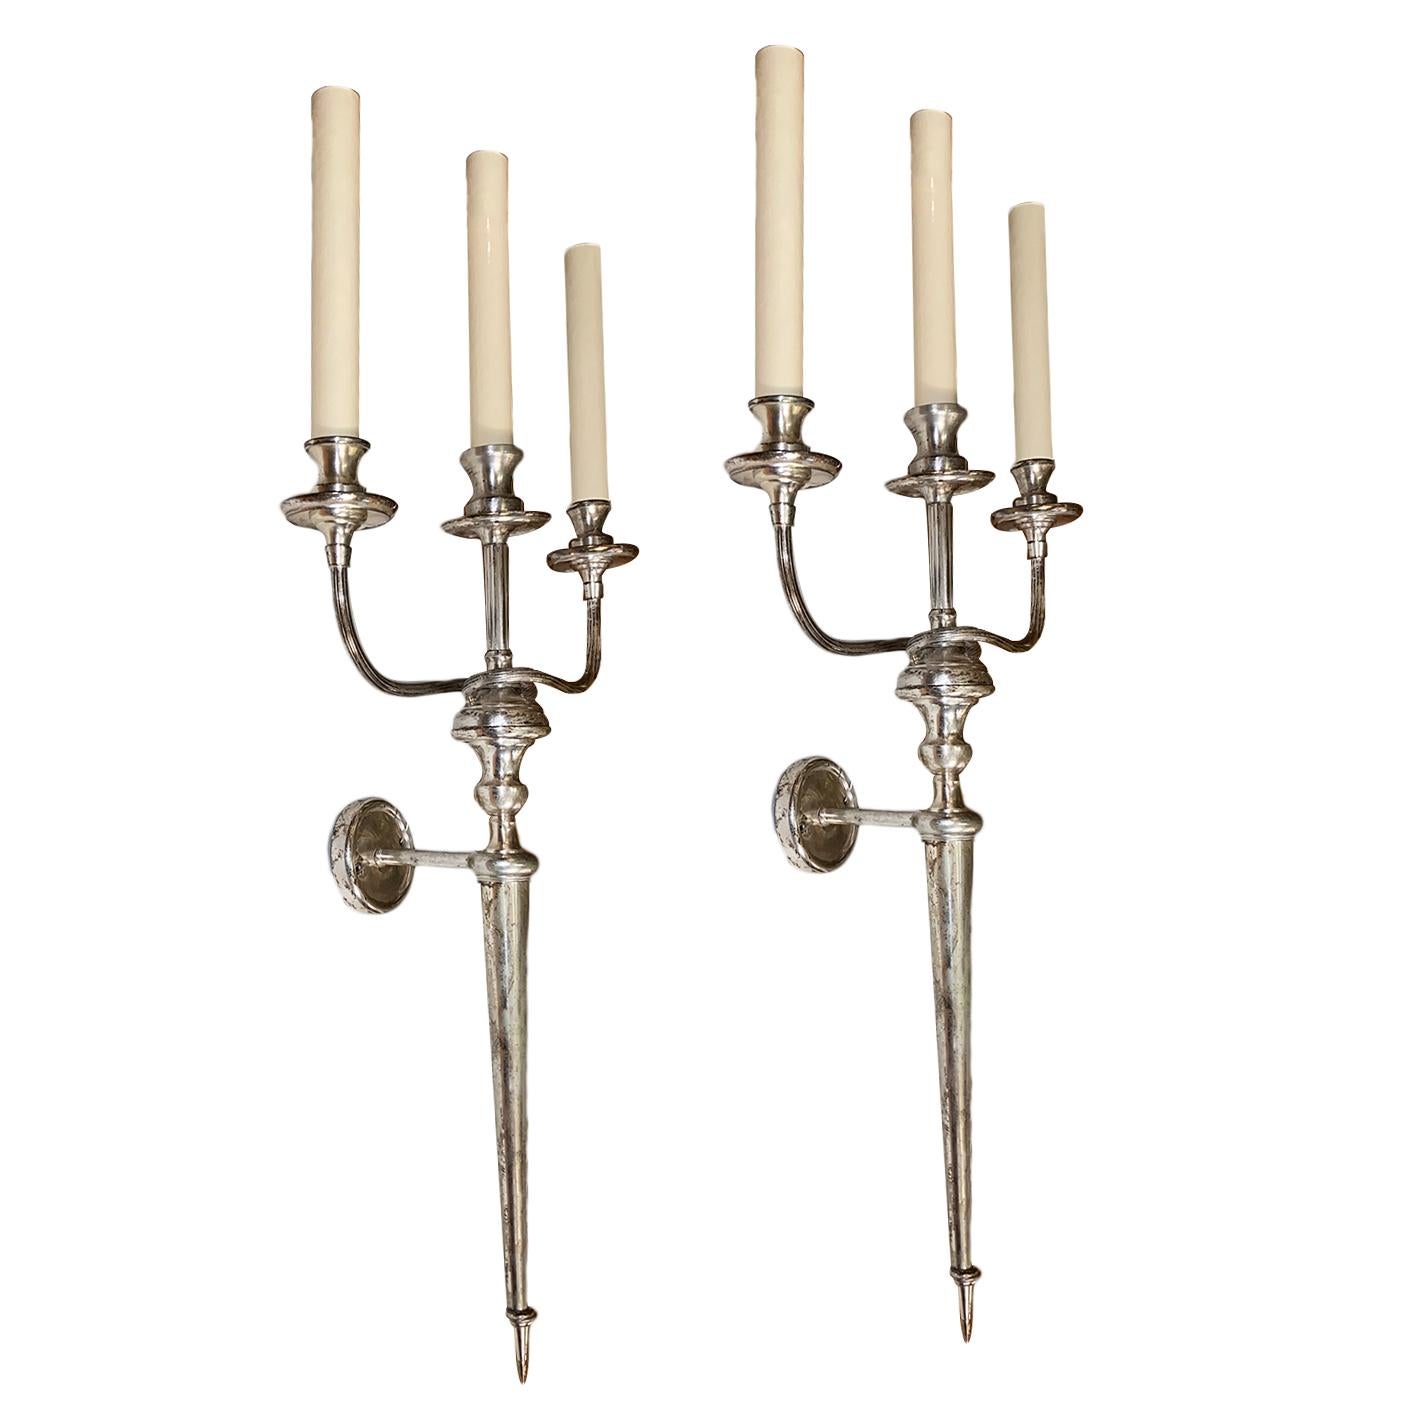 Pair of Italian 1930s silver plated three-arm sconces.
Measurements:
Height 25